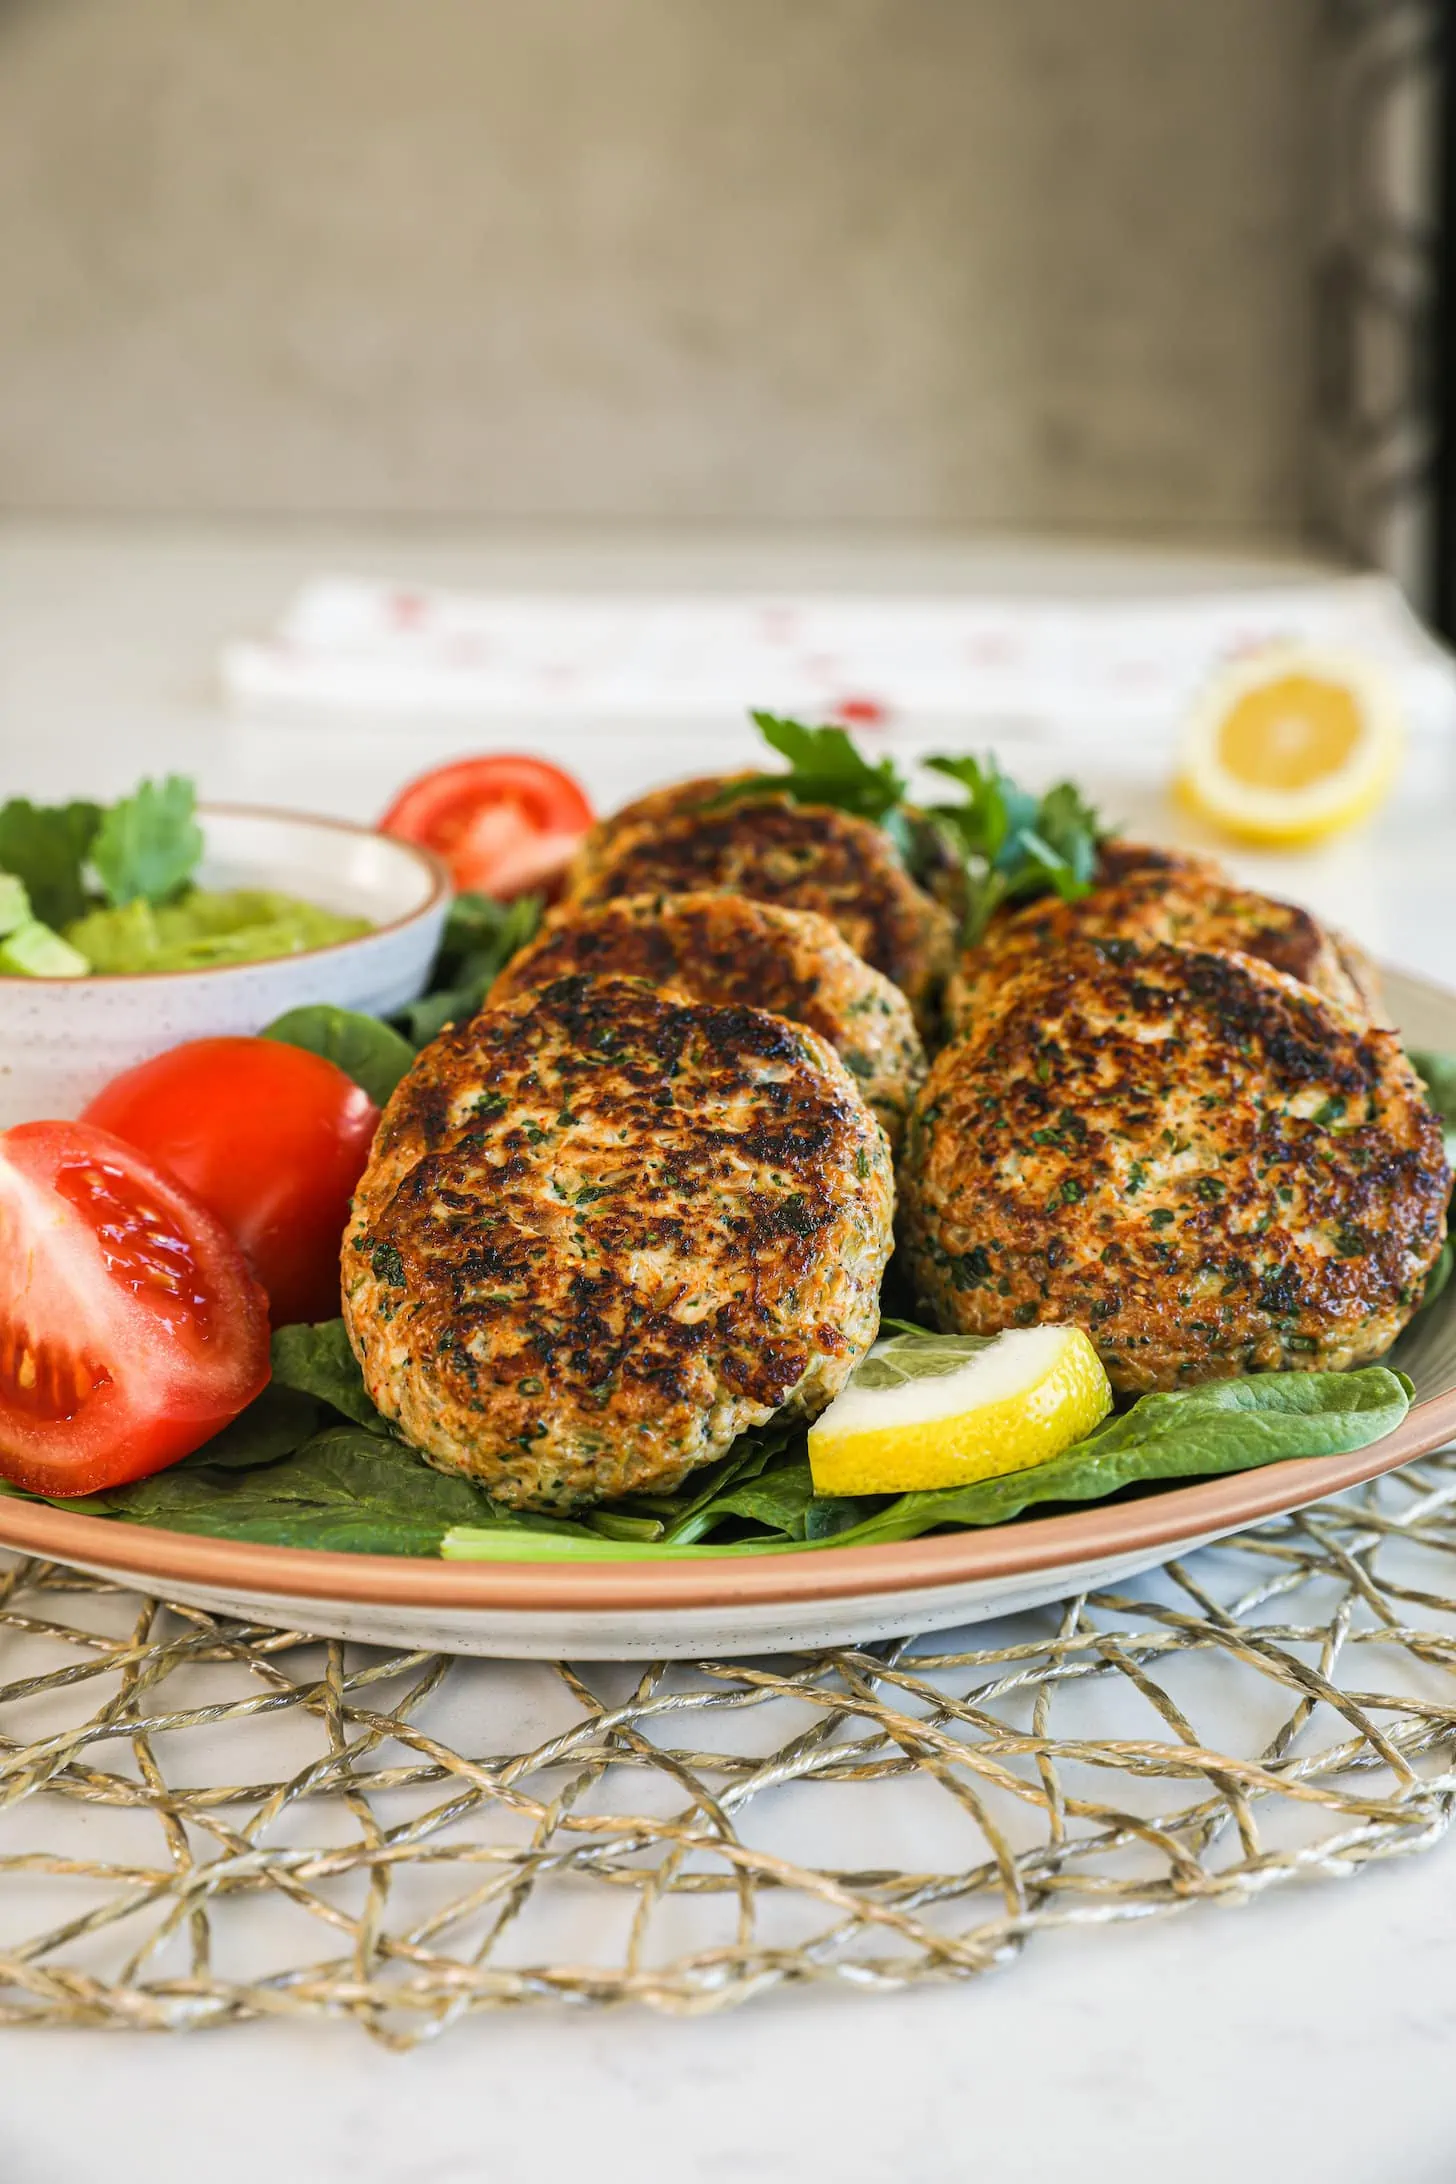 a plate of cooked patties overlaid on one another on a bed of greens with a bowl of dip on the side - perspective shot.